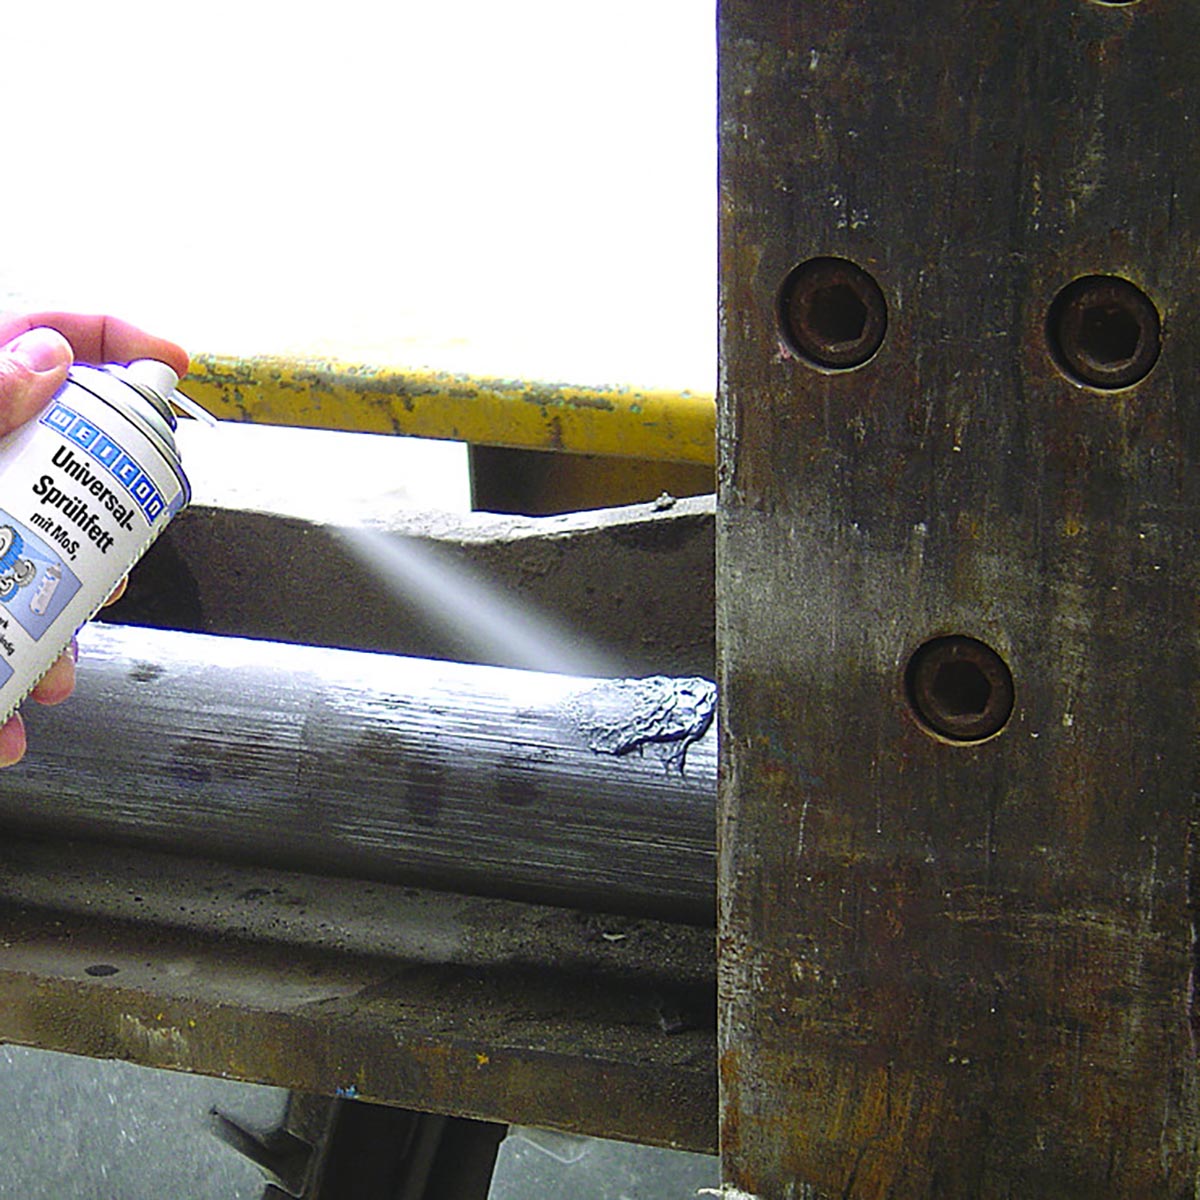 Wooden fence joint being lubricated with Weicon Universal Spray-On Grease MoS2